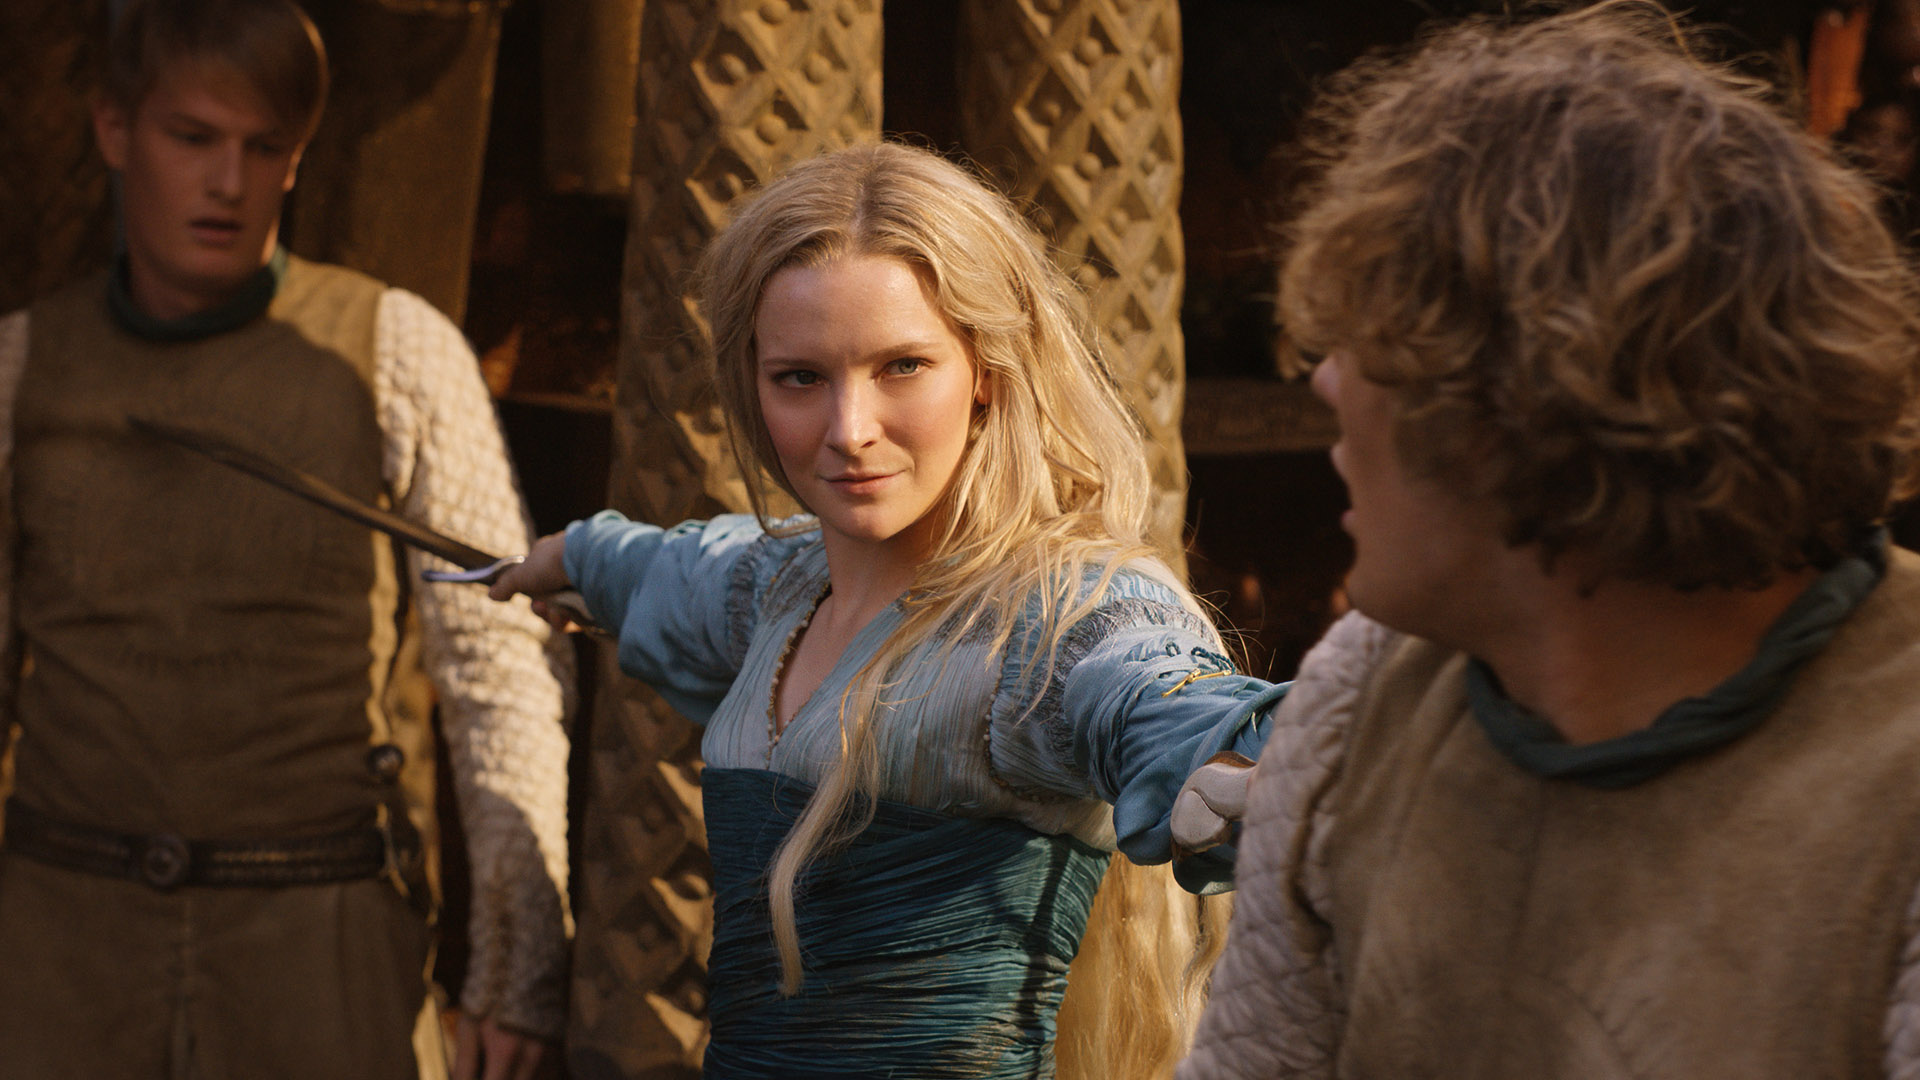 Galadriel playfully holds two swords up to some Numenorean soldiers in The Rings of Power episode 5